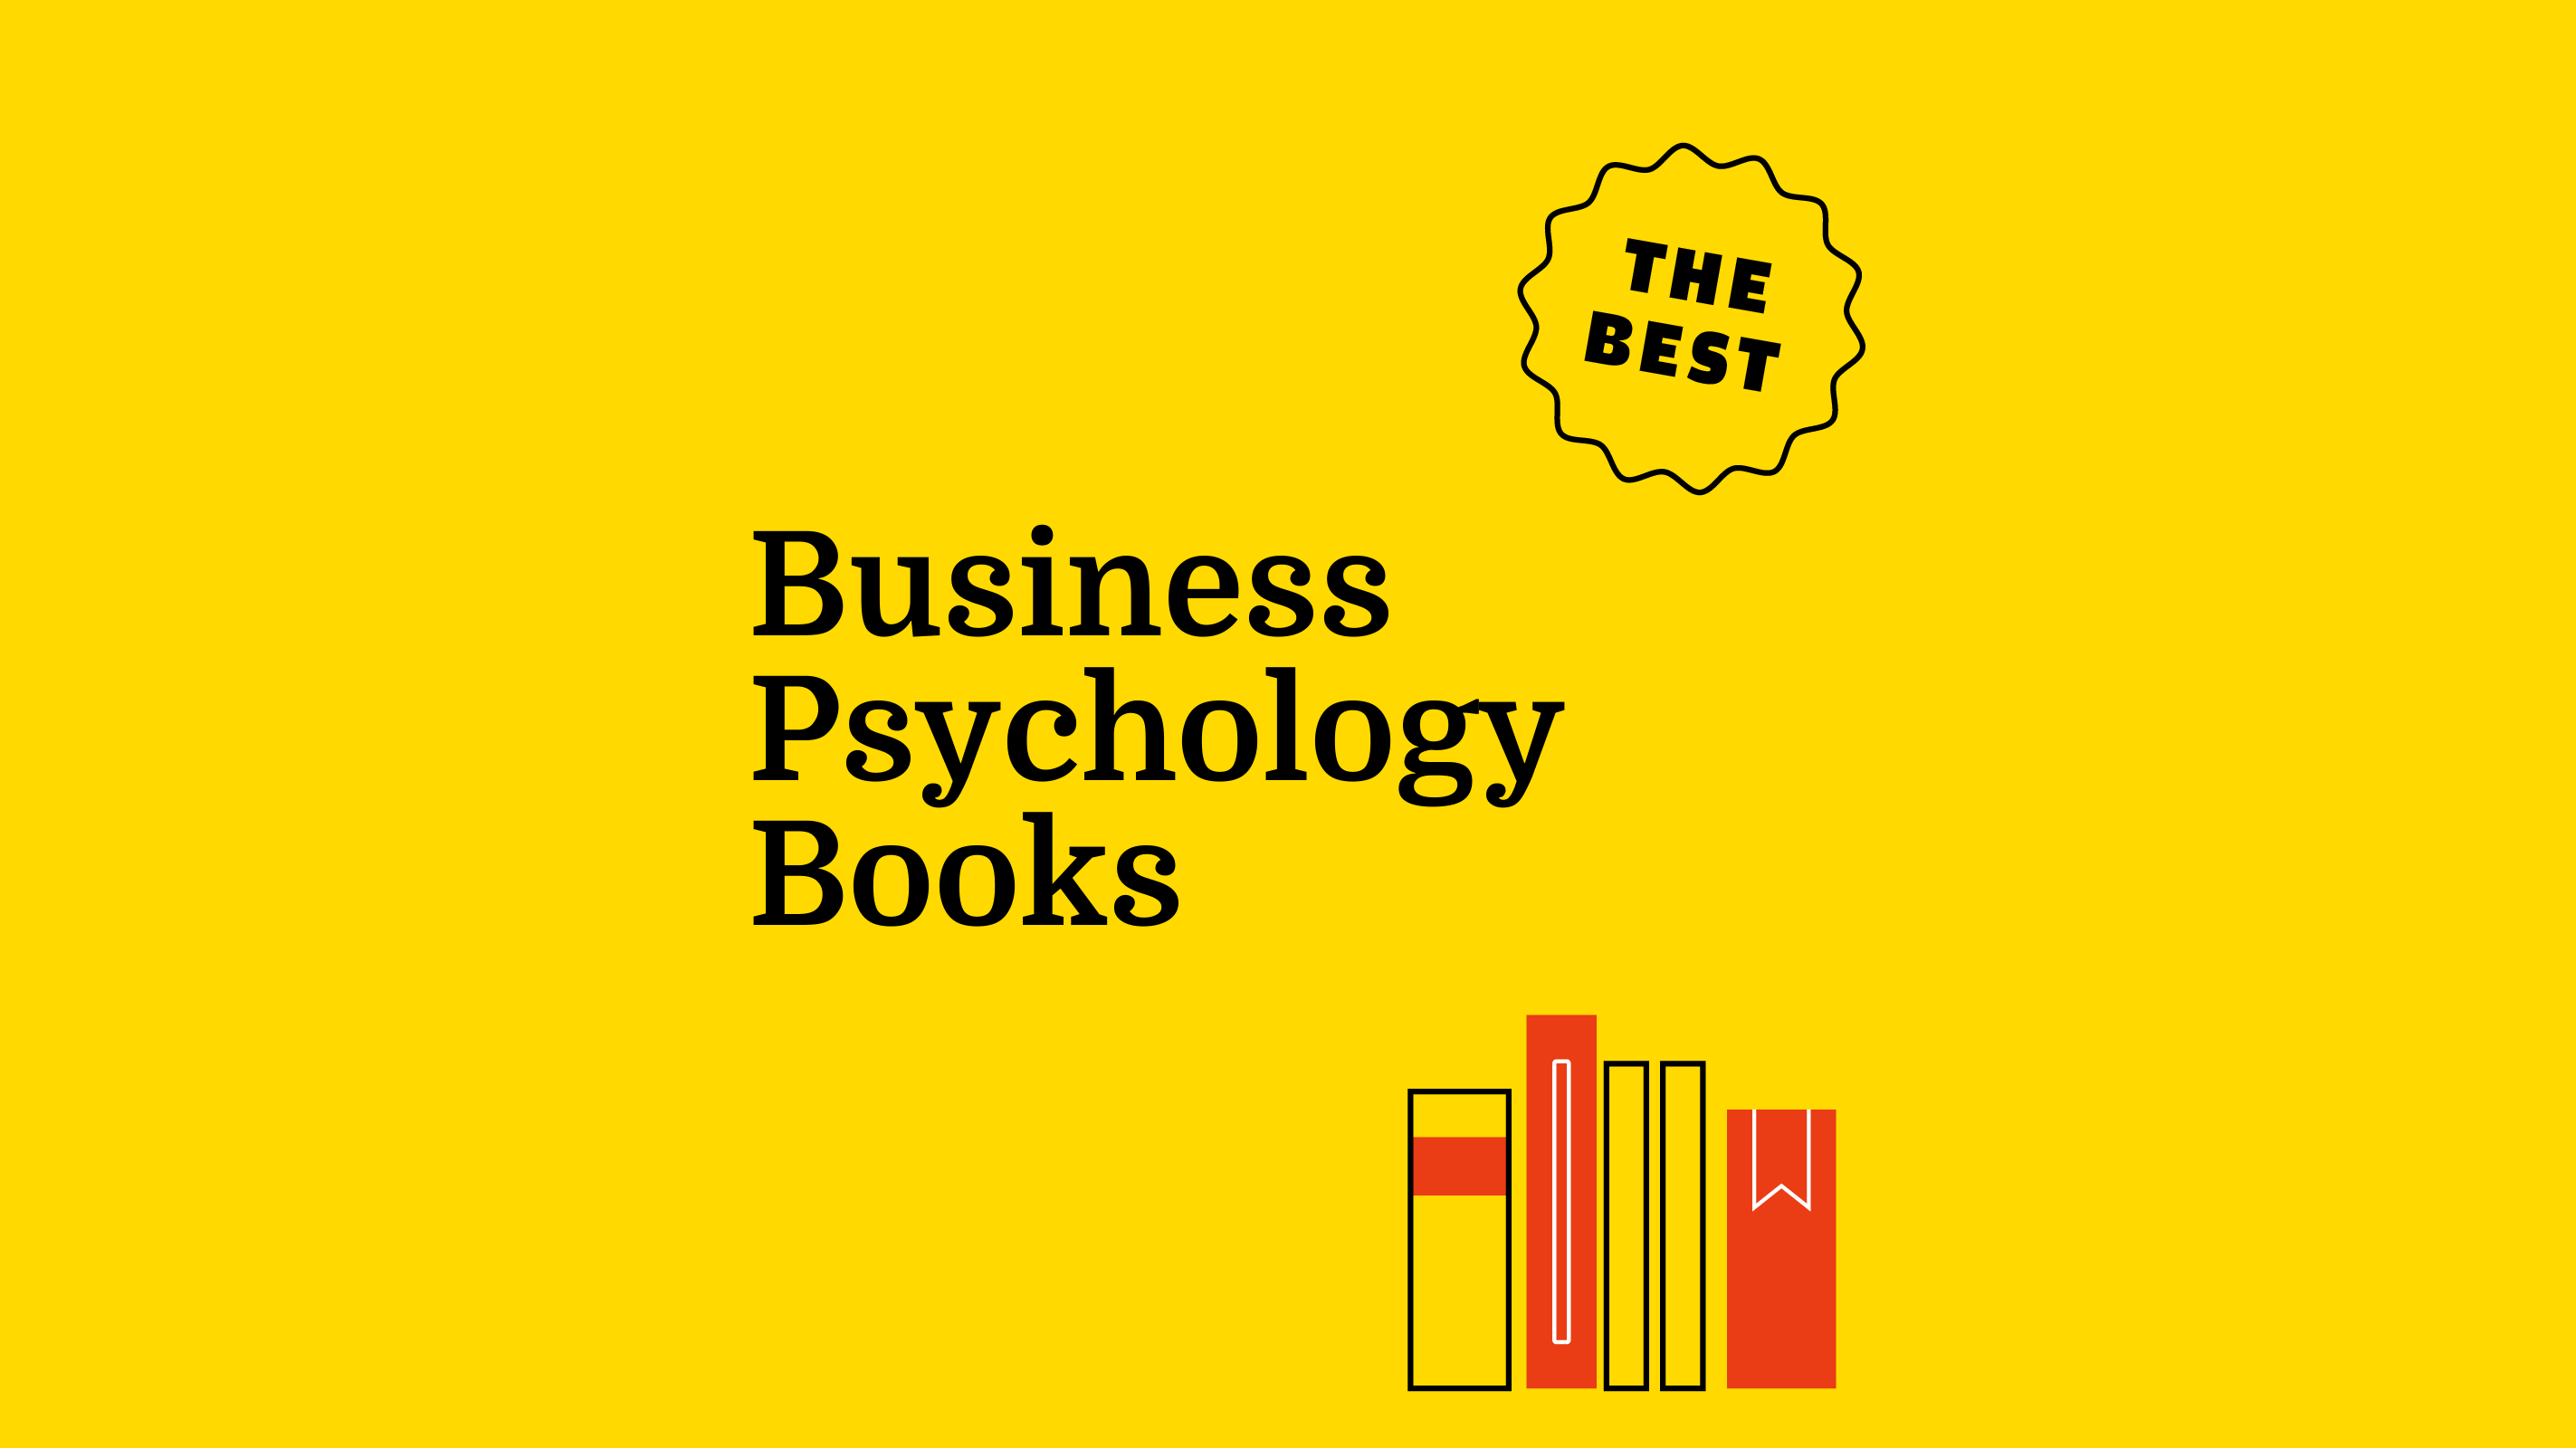 REV-business-psychology-books-featured-image-3942